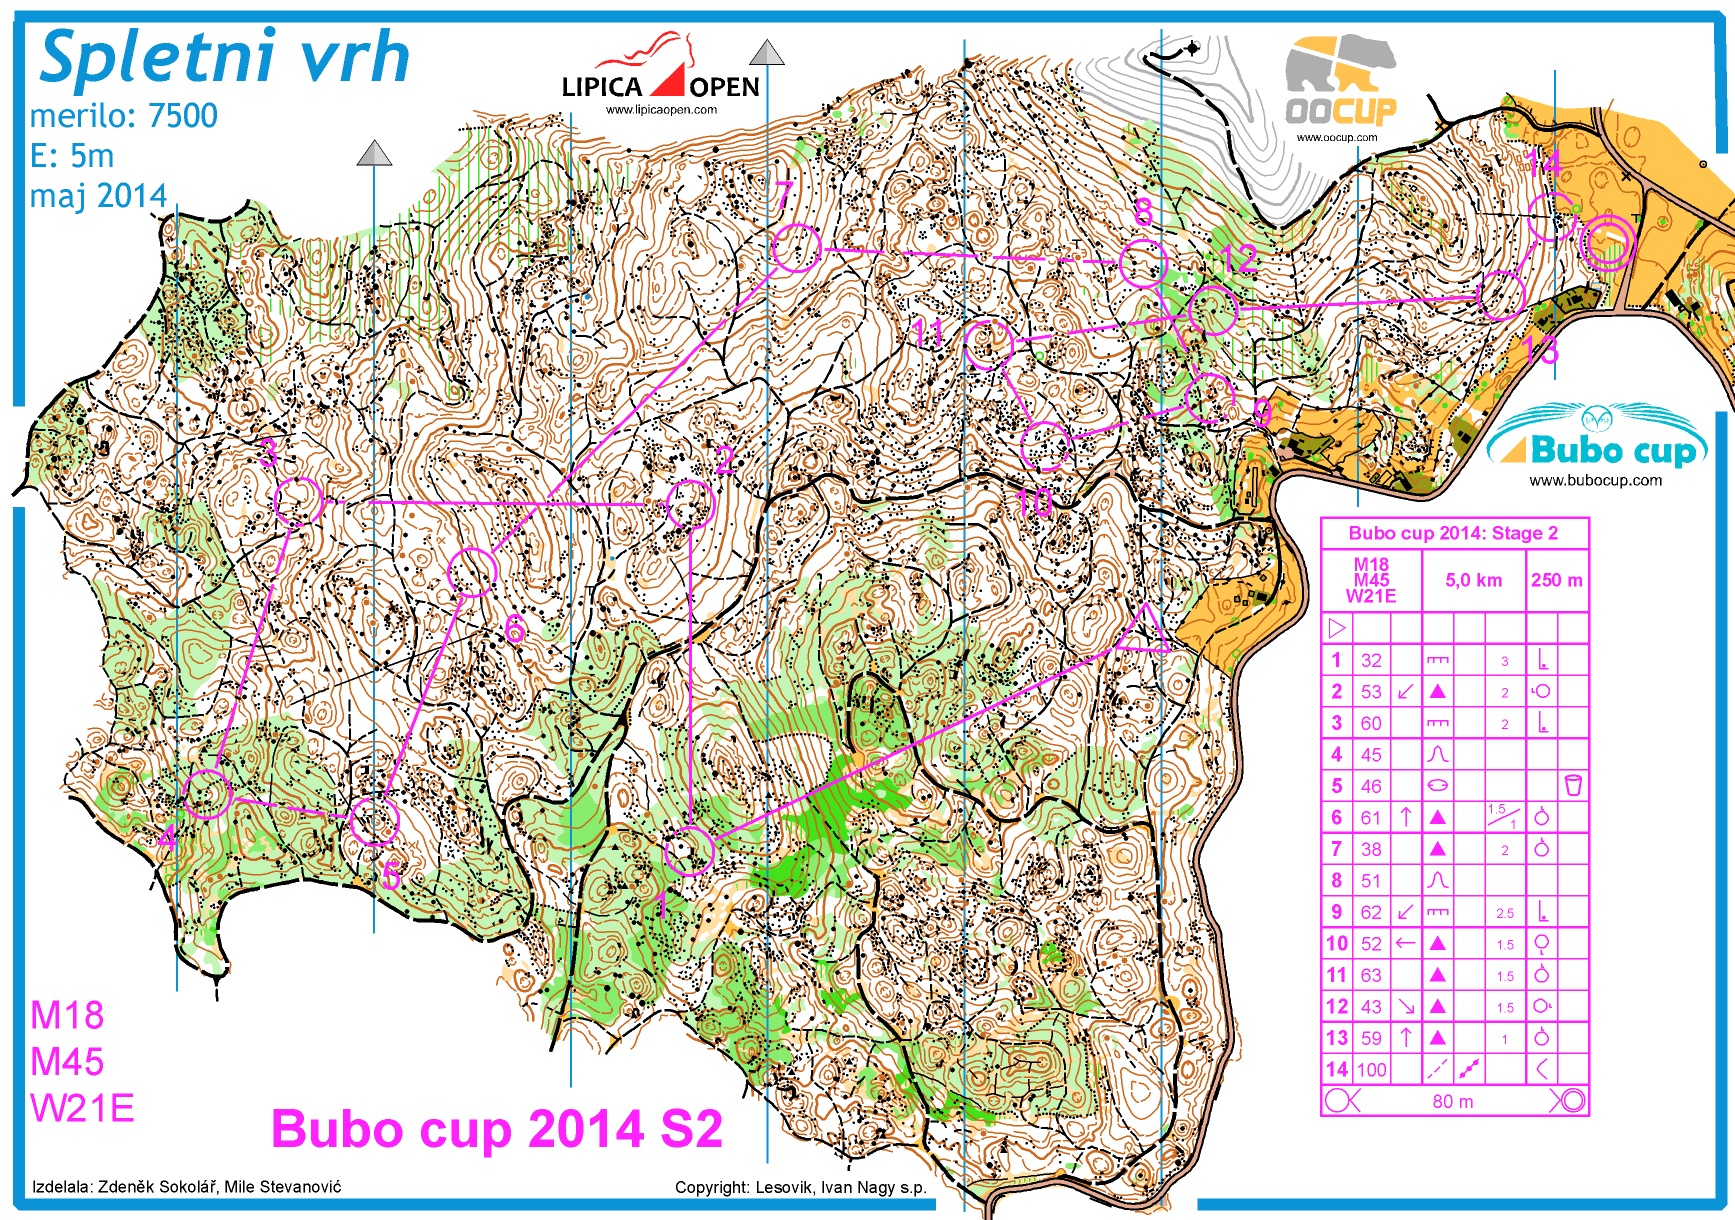 Bubo cup 2014 W21E Stage2 (24-07-2014)